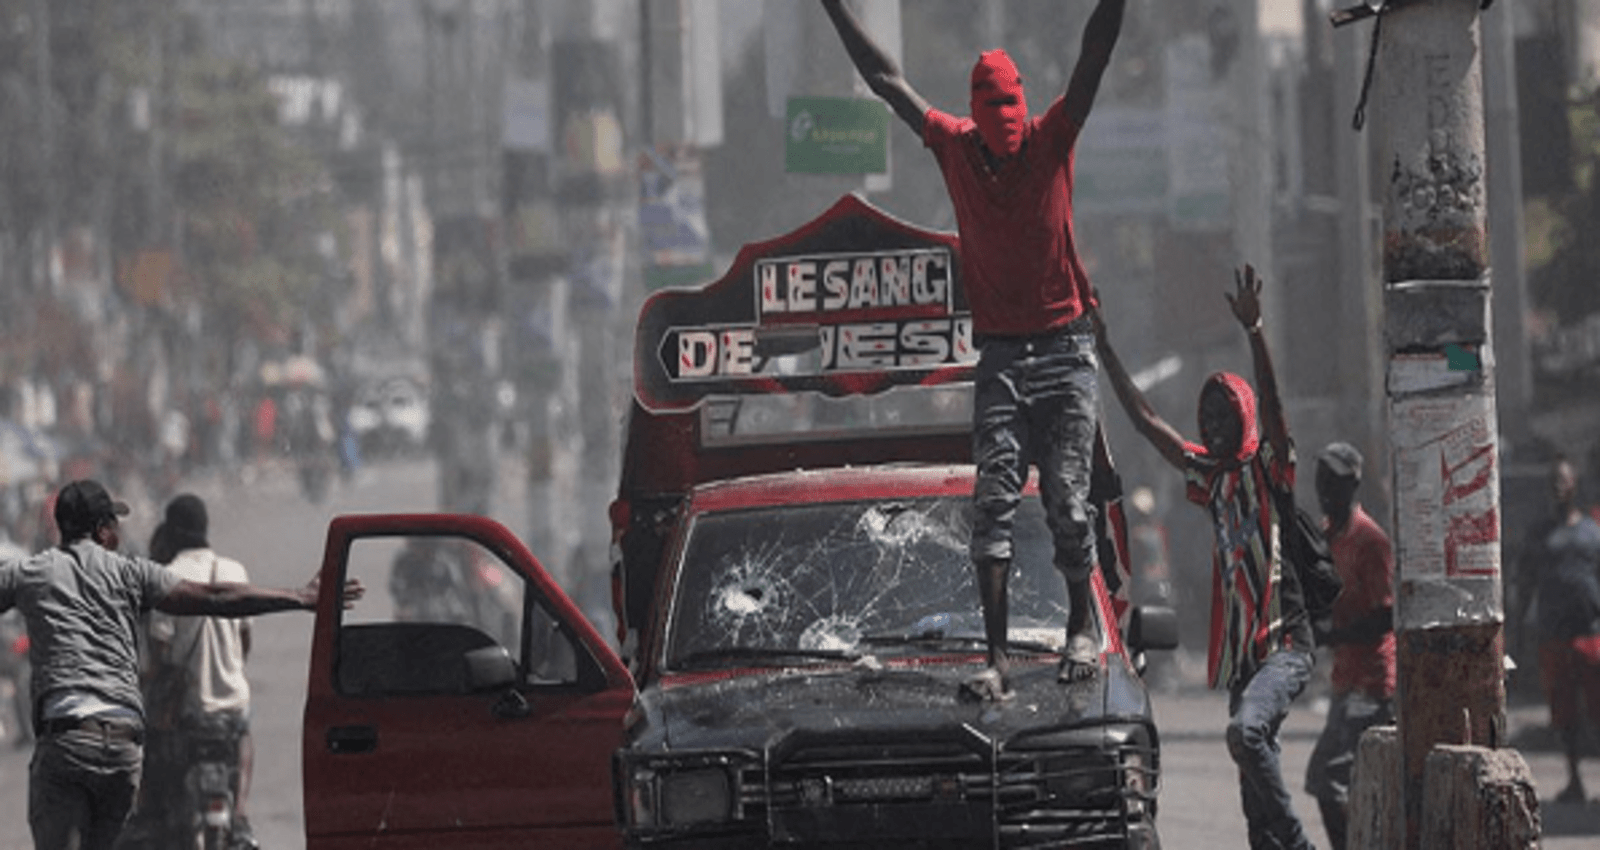 Haiti declares state of emergency after gang violence 